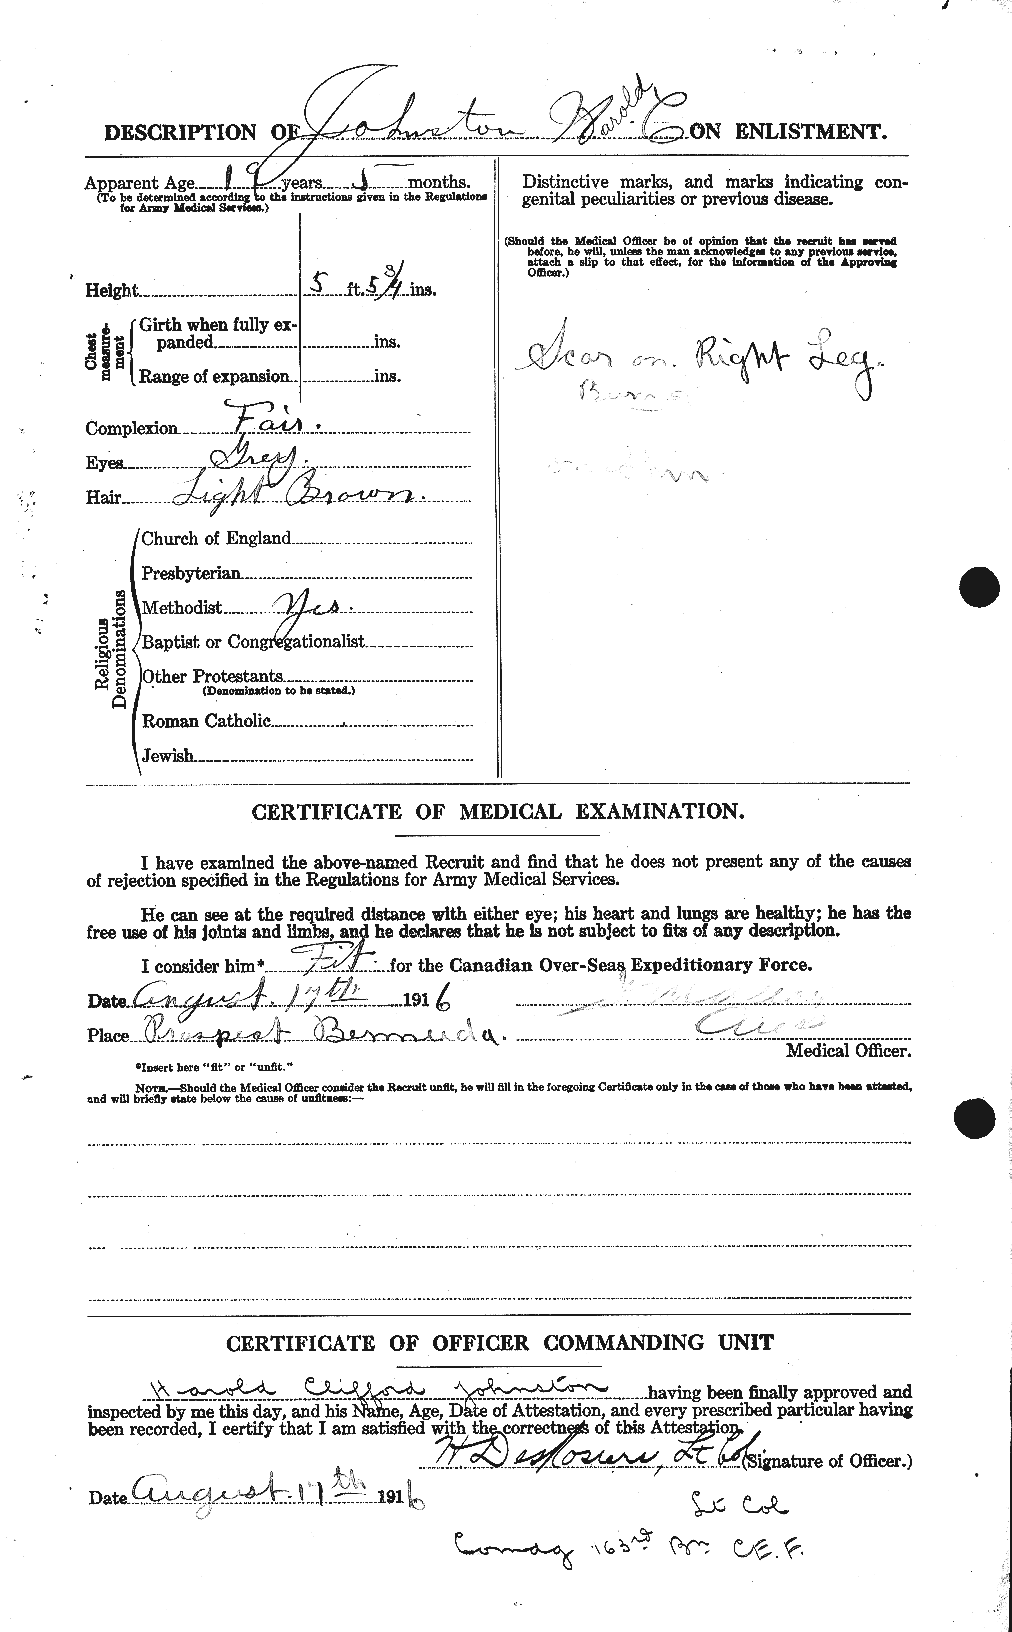 Personnel Records of the First World War - CEF 419486b